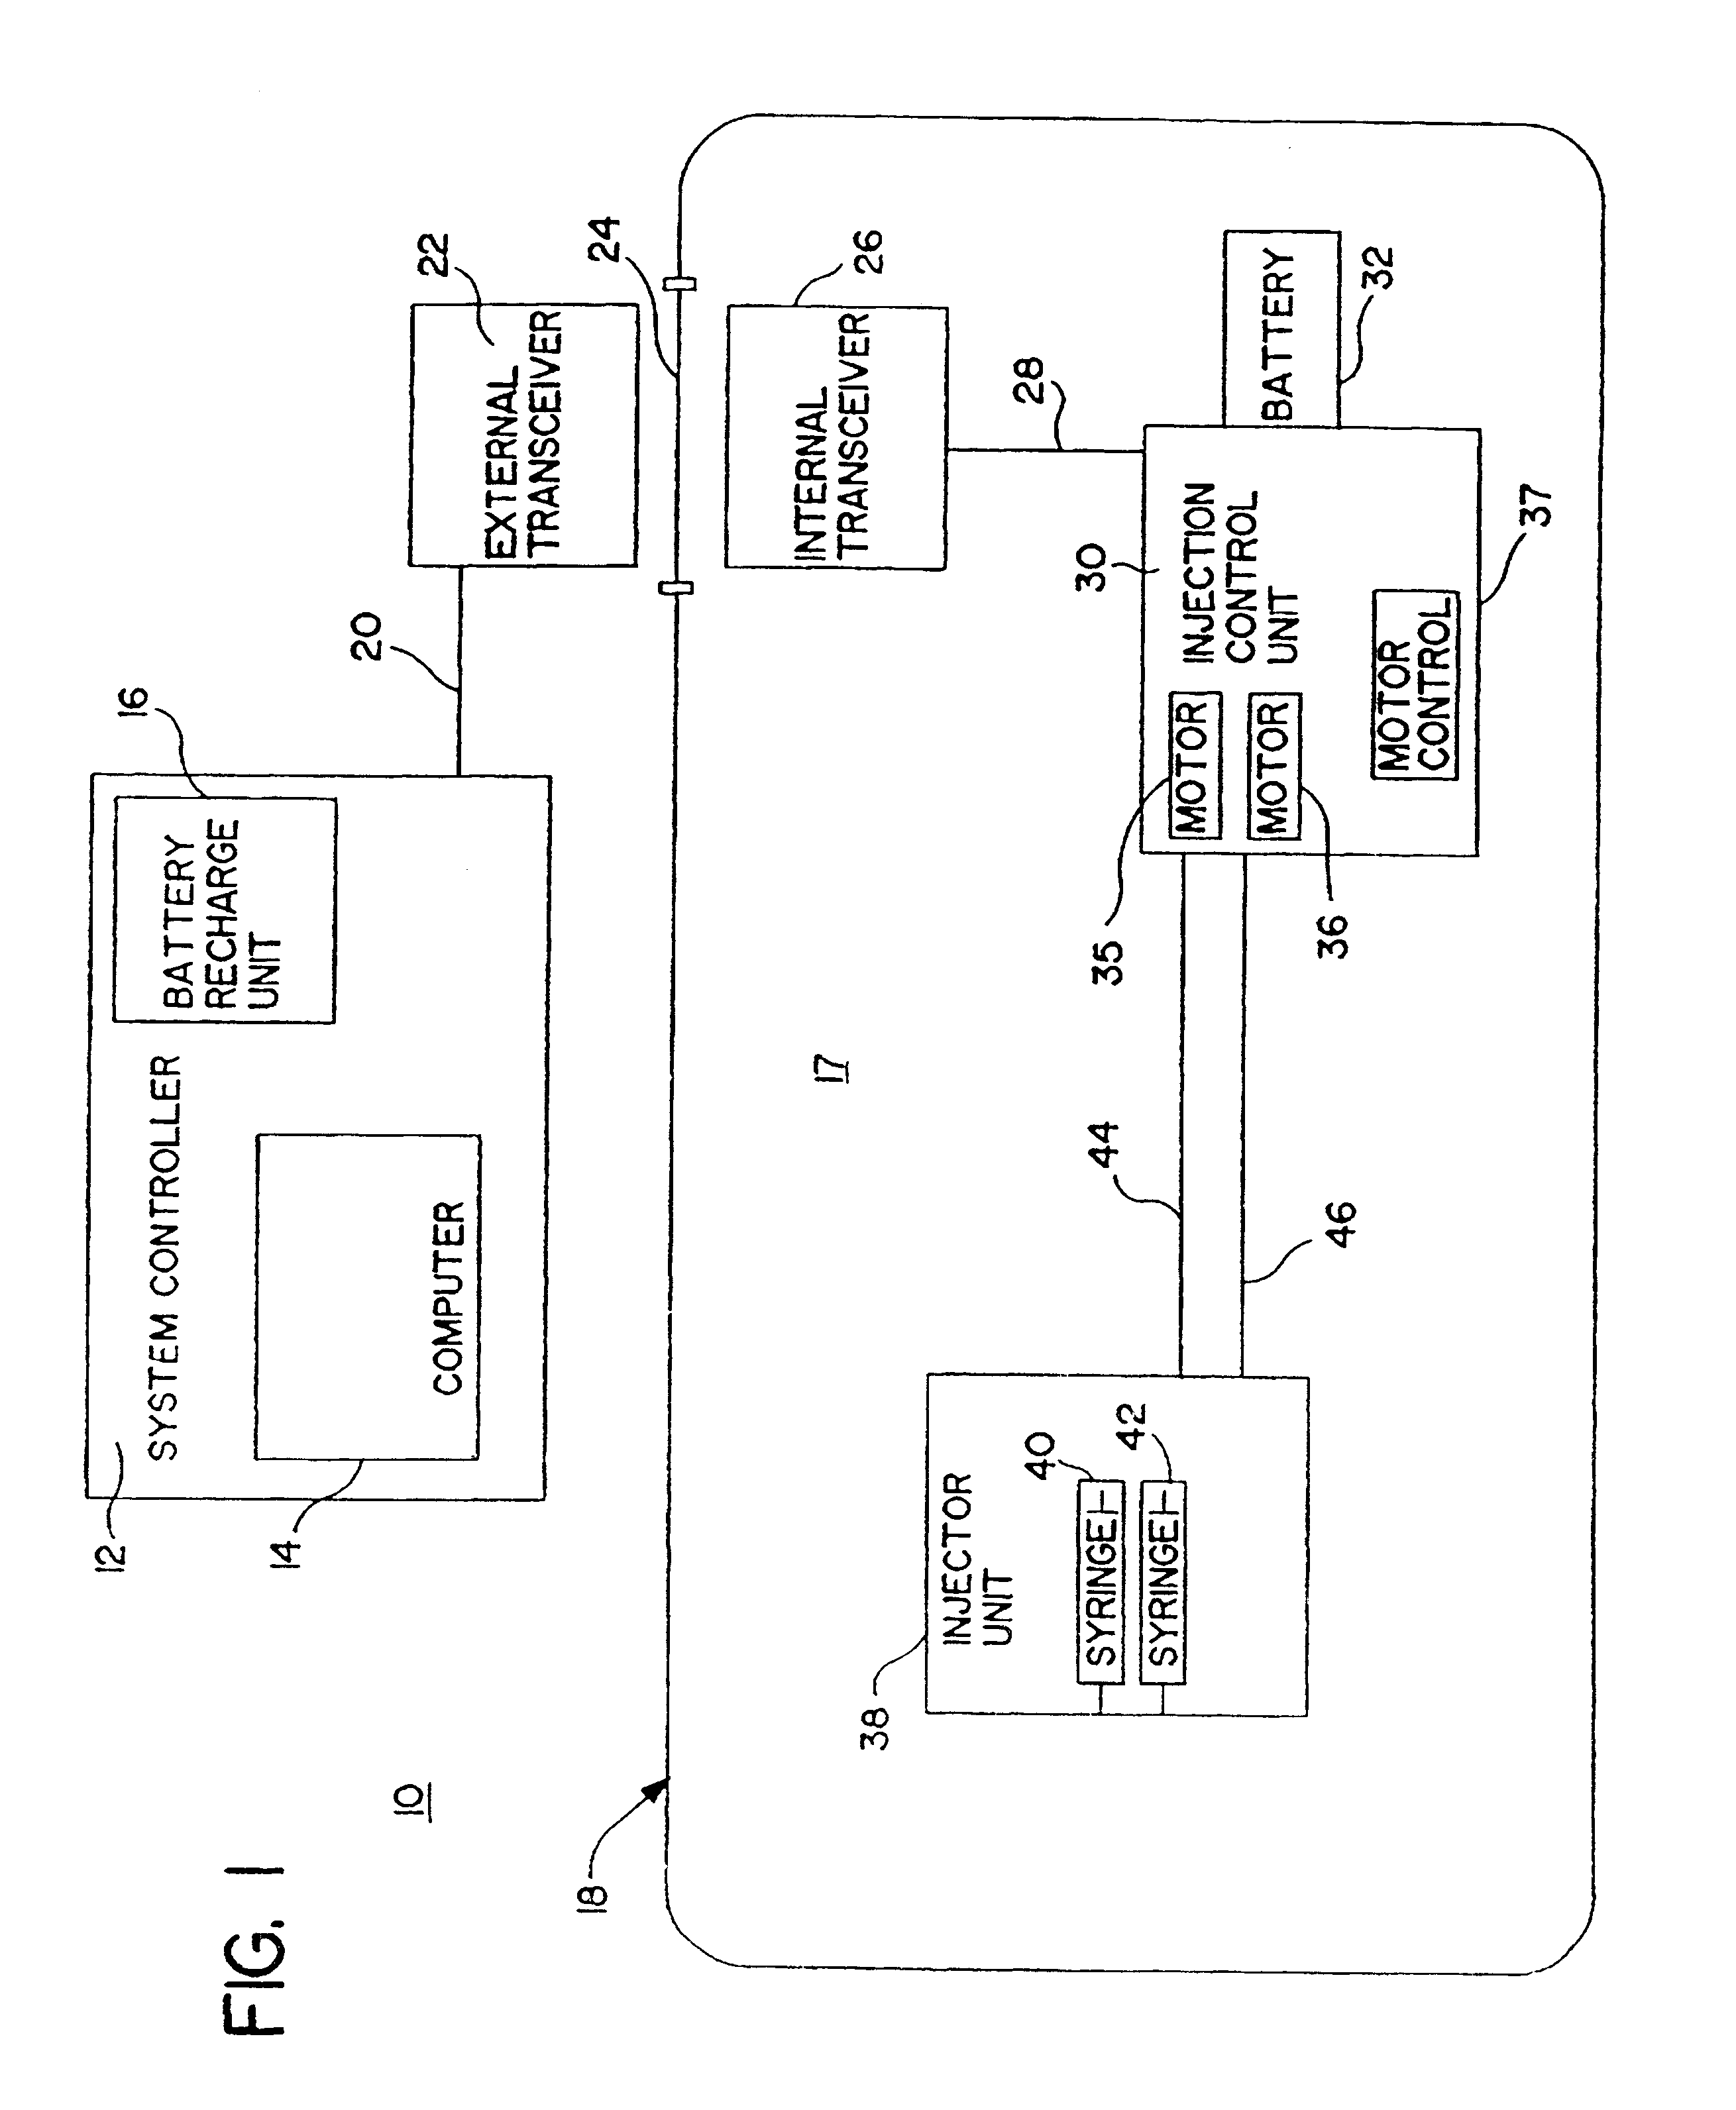 Patient infusion system for use with MRI